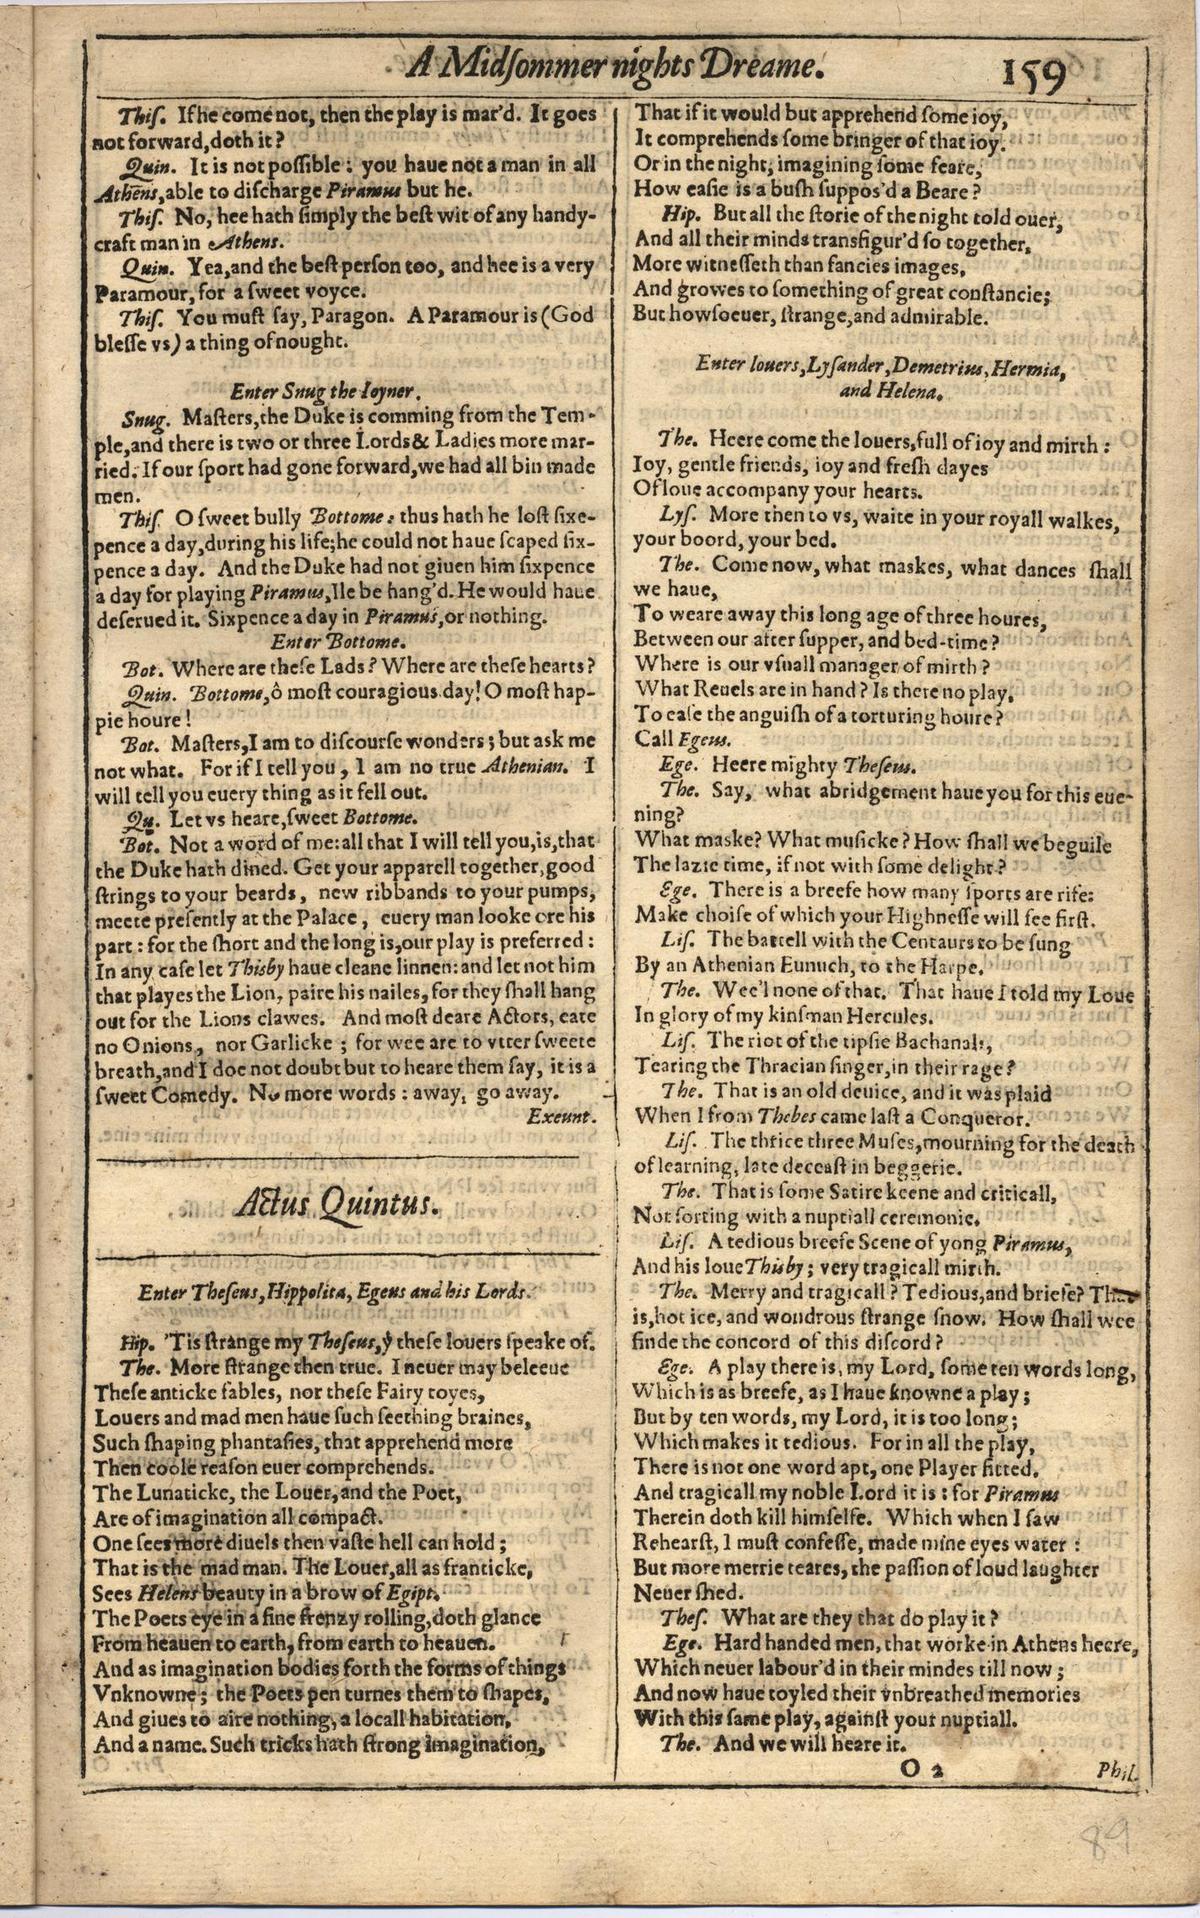 Image of page 177